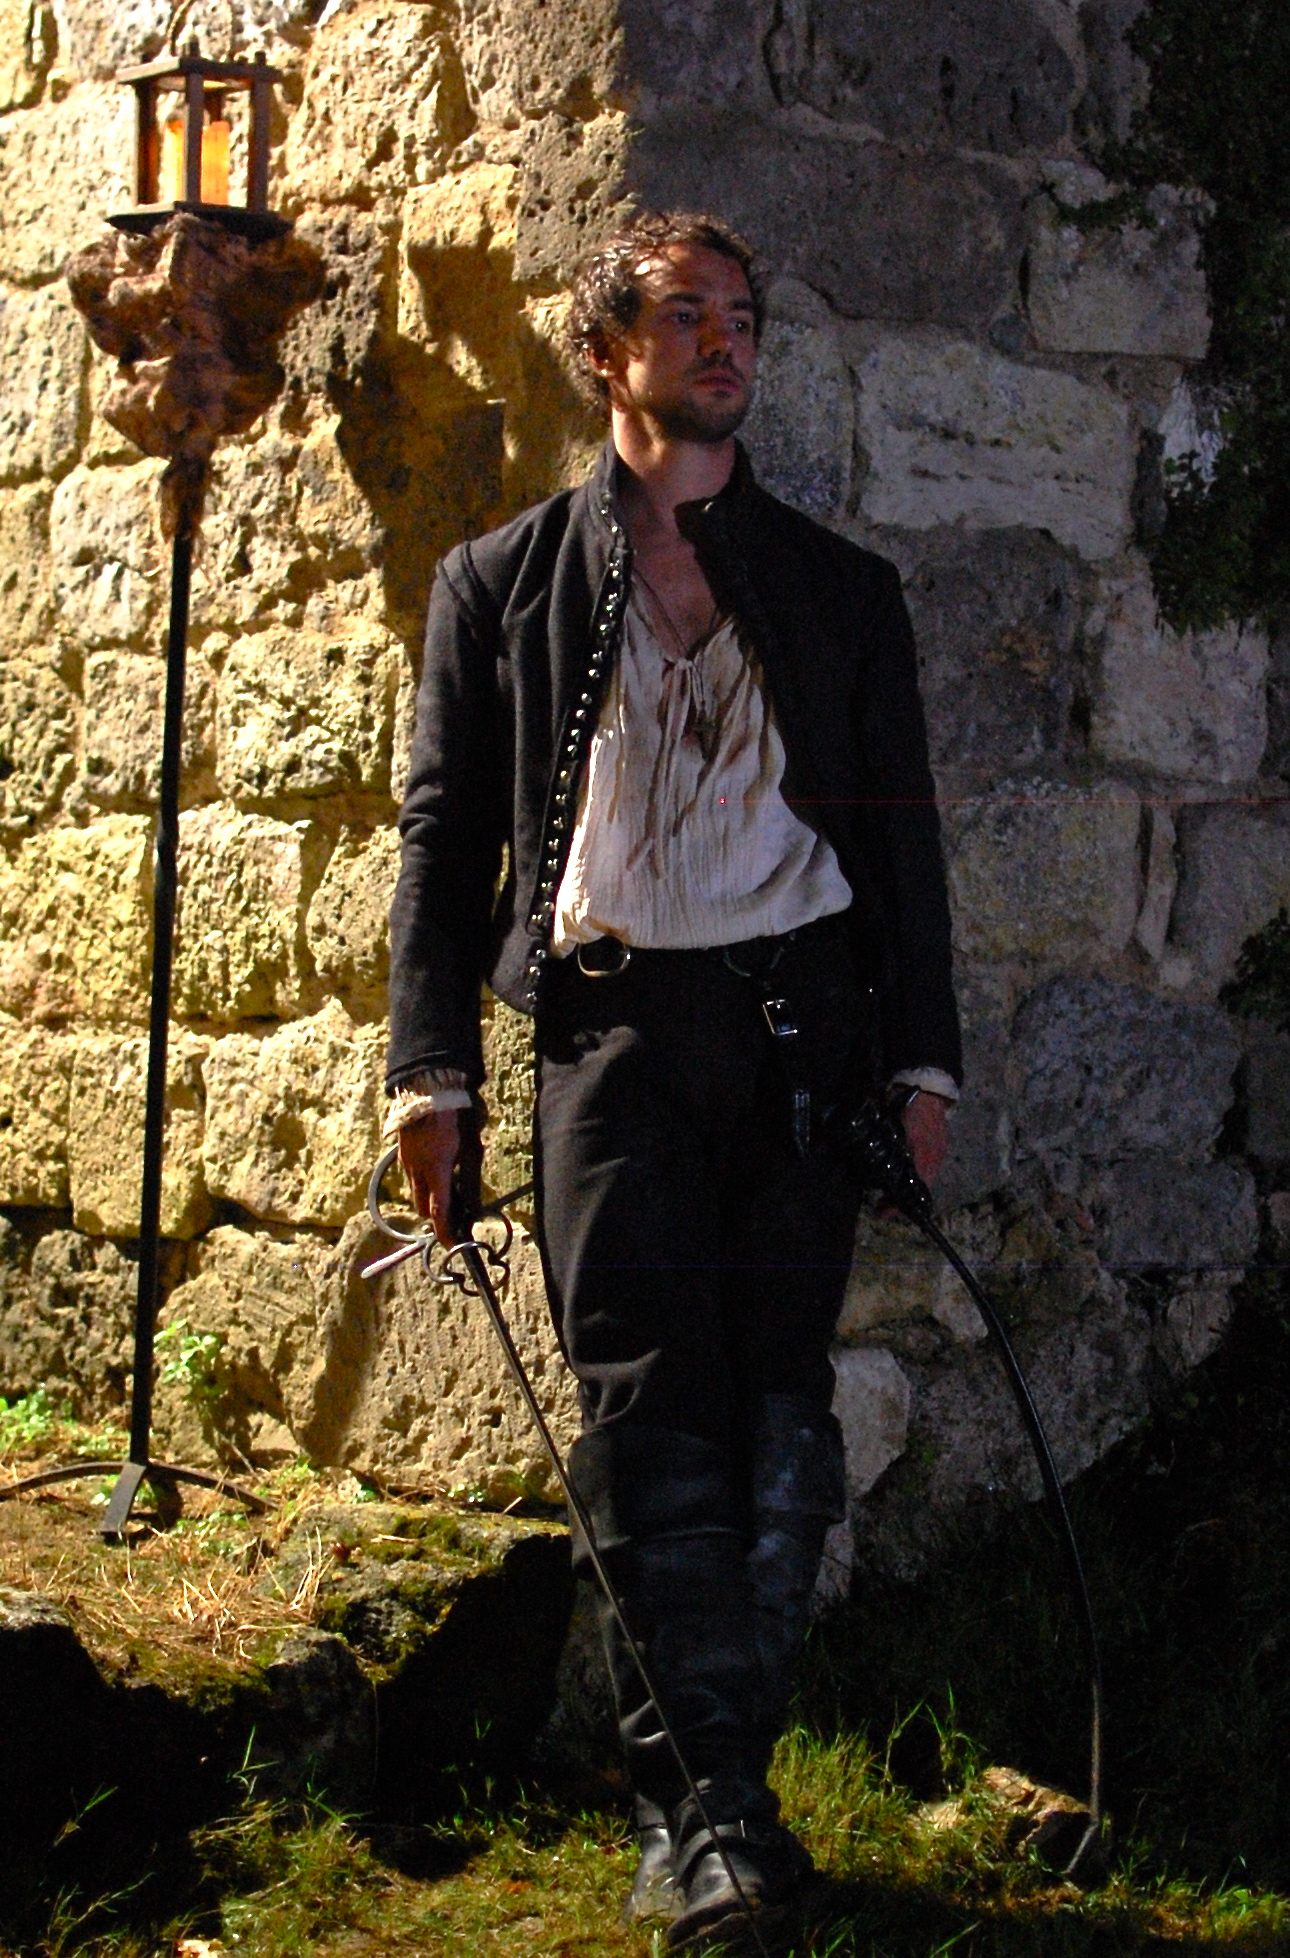 The Pilgrim in the First Musketeer